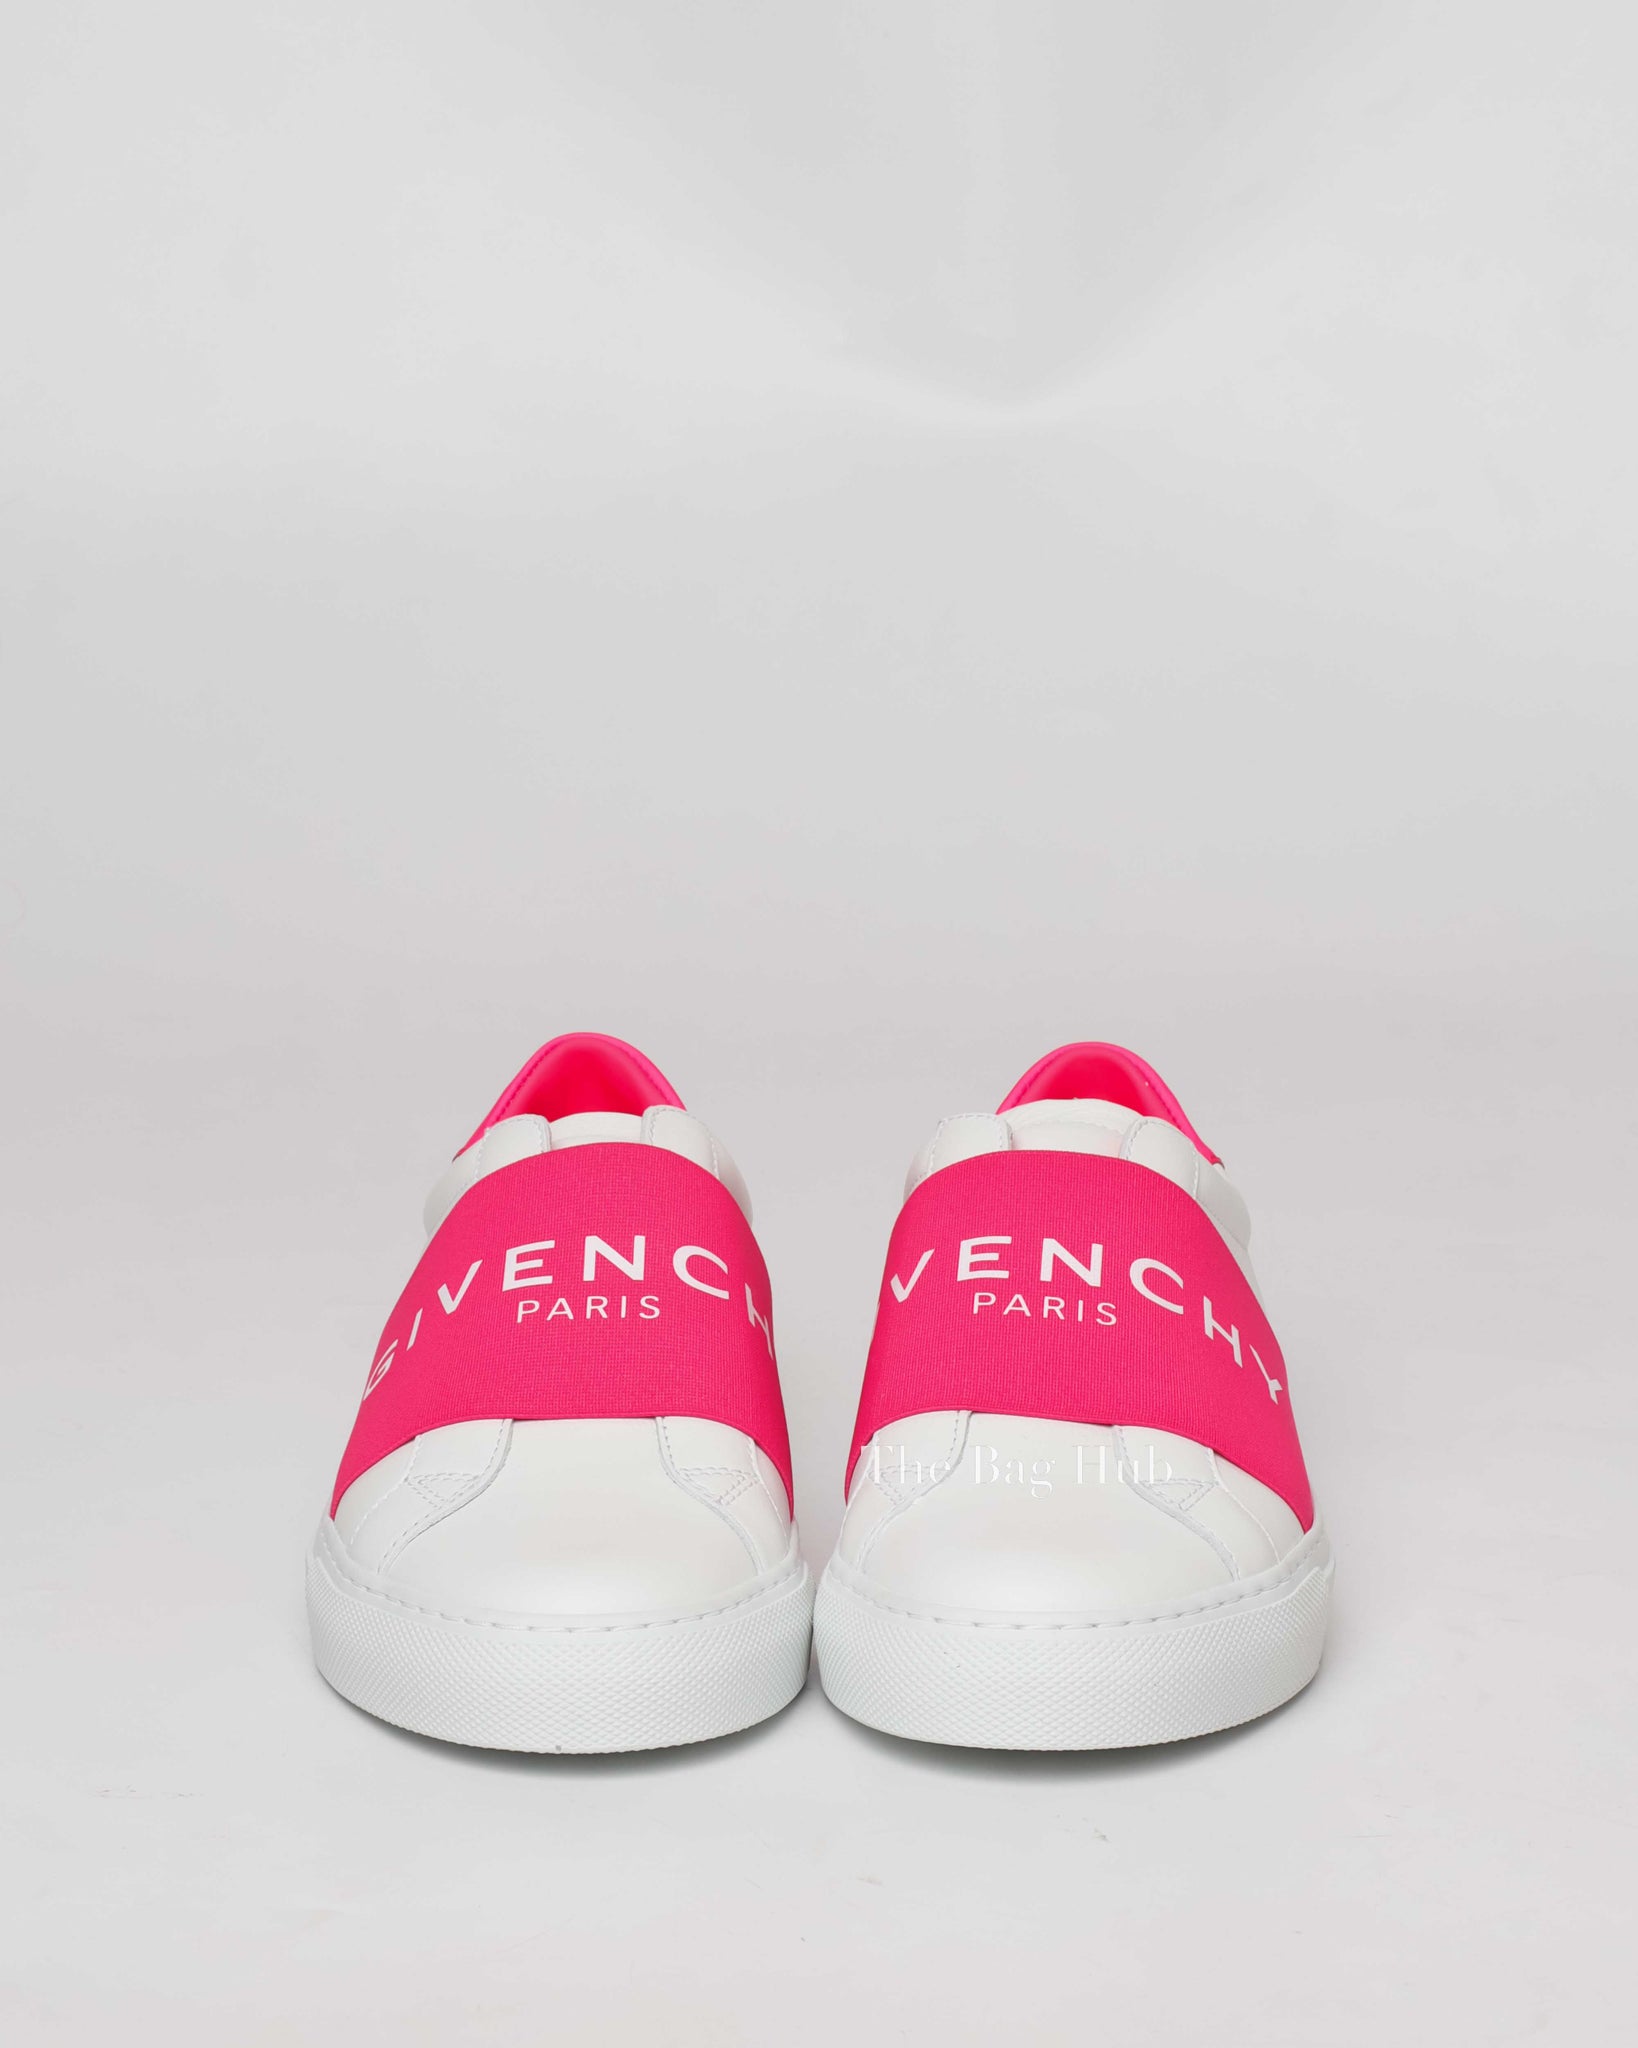 Givenchy White/Pink Leather Urban St. Logo Sneakers Size 35-3